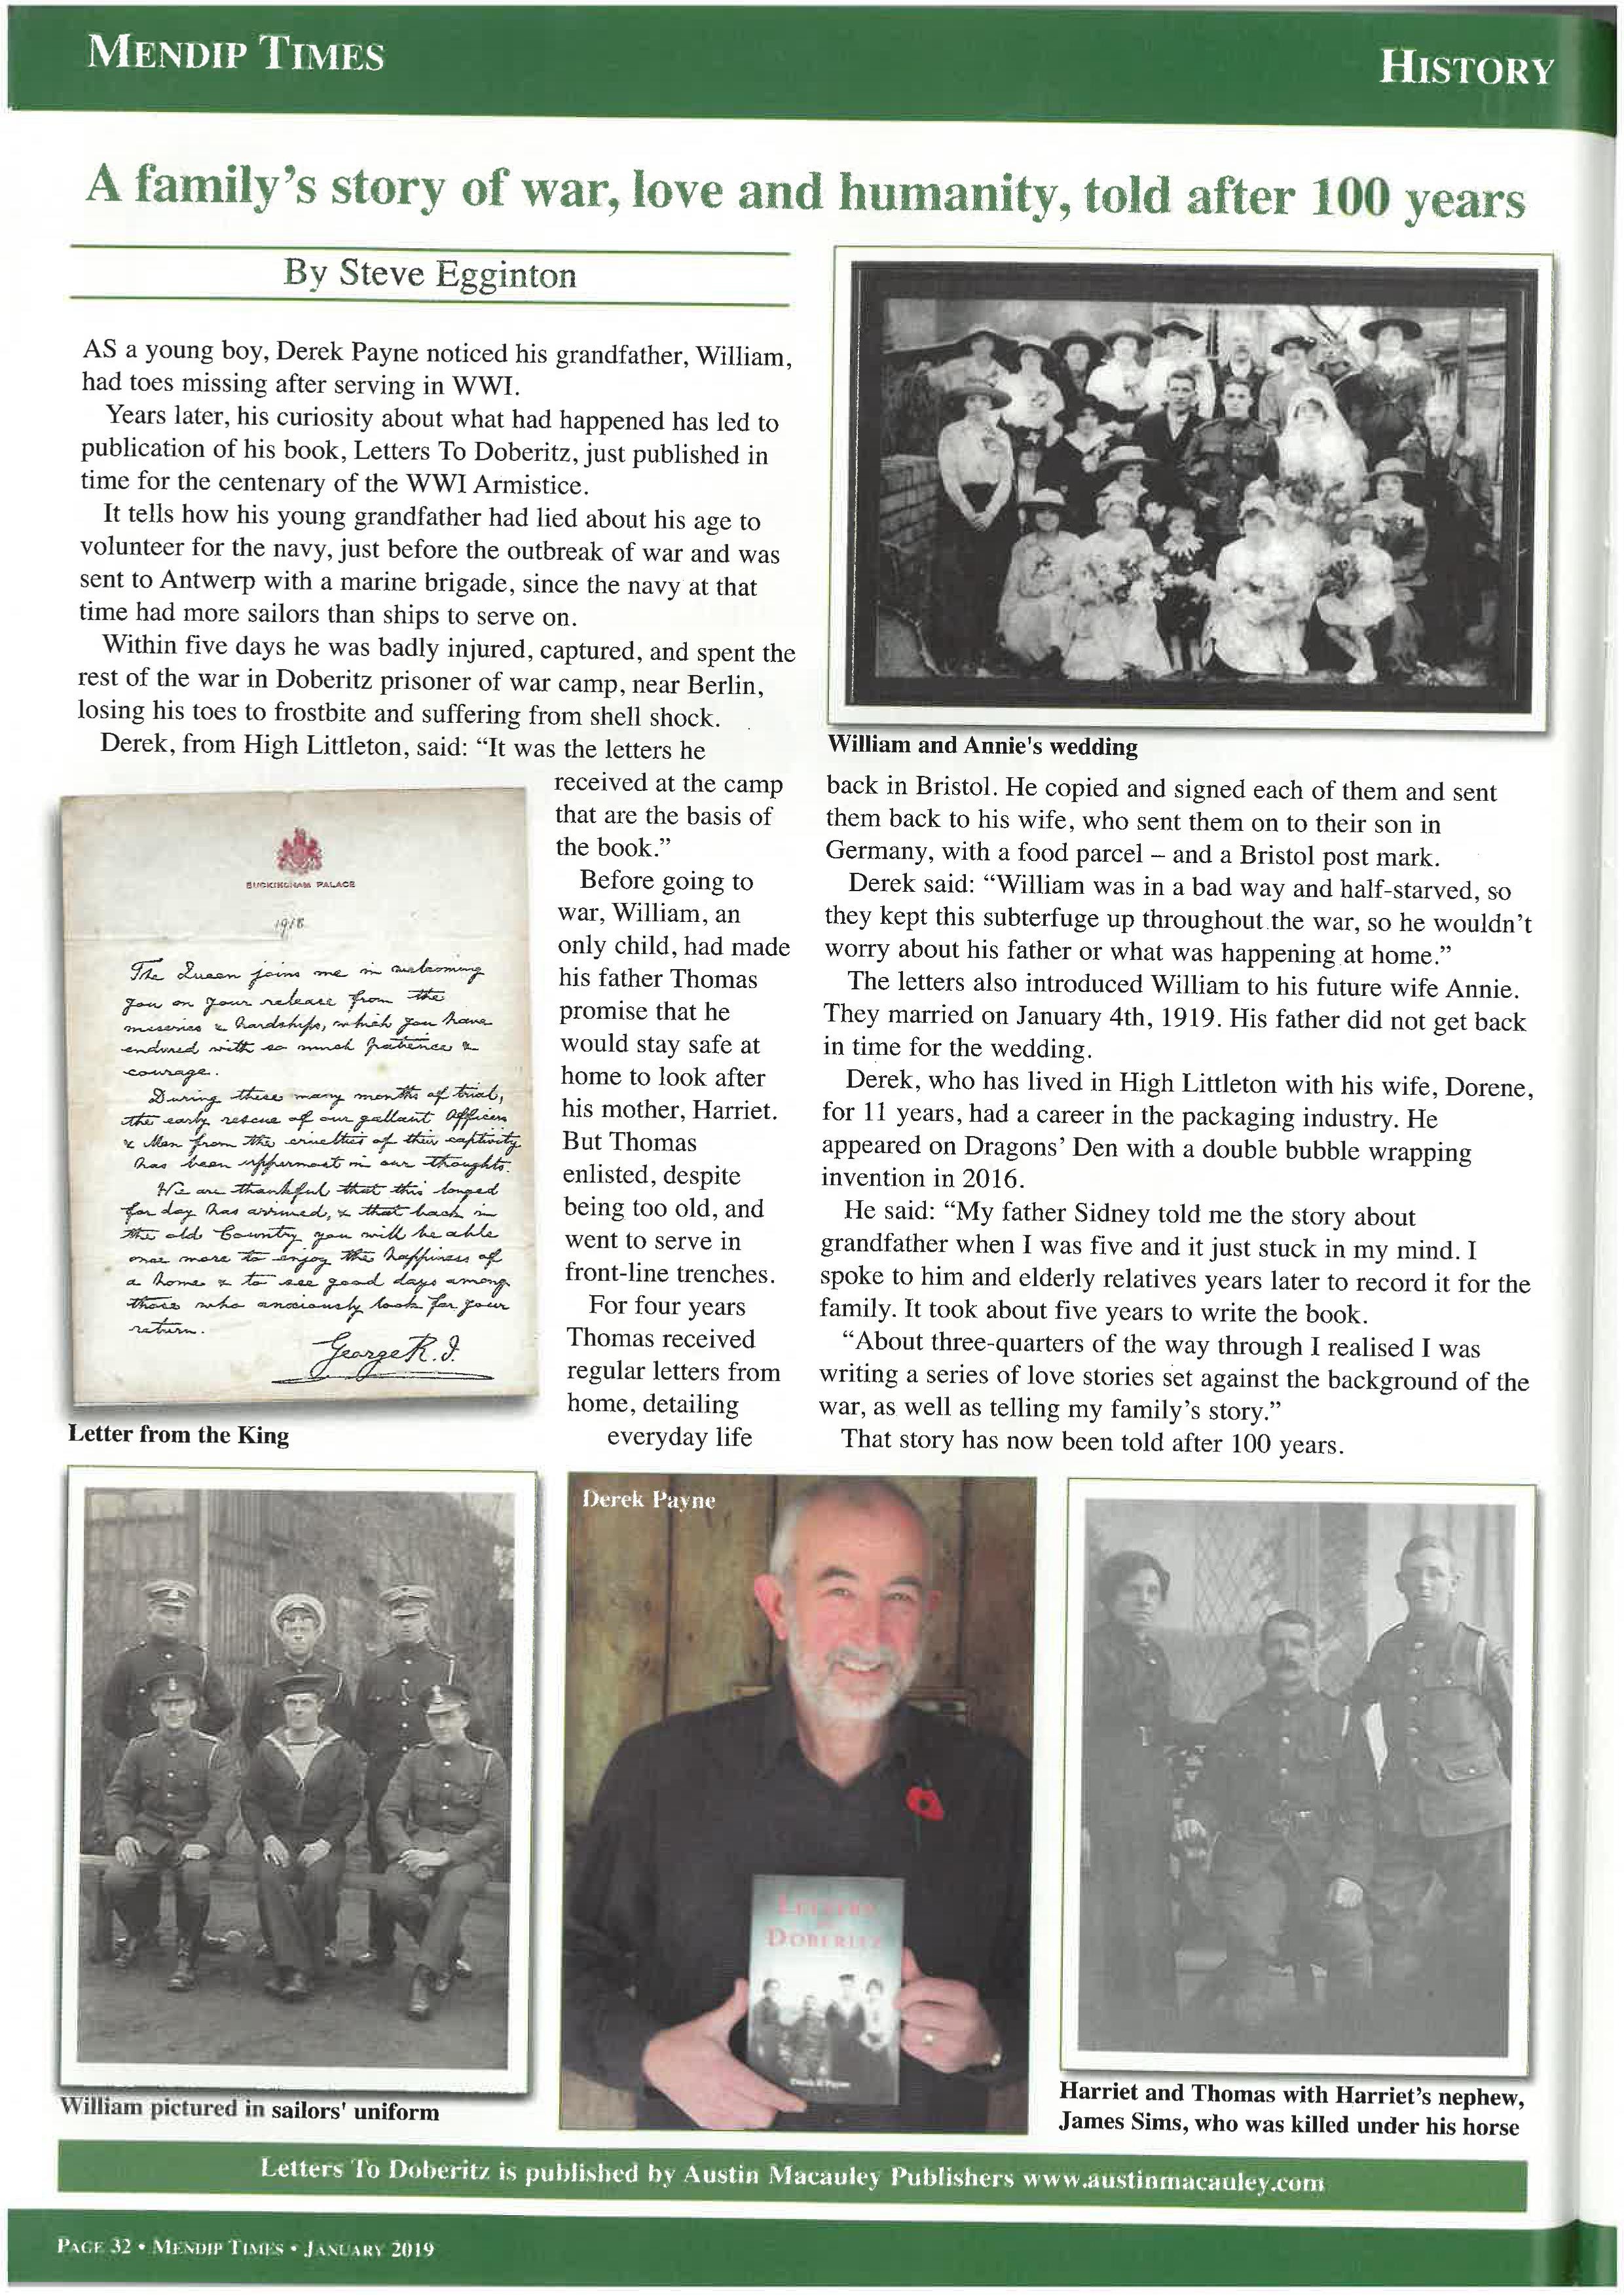 ‘Letters to Doberitz’ by Derek R Payne Featured in The Mendip Times